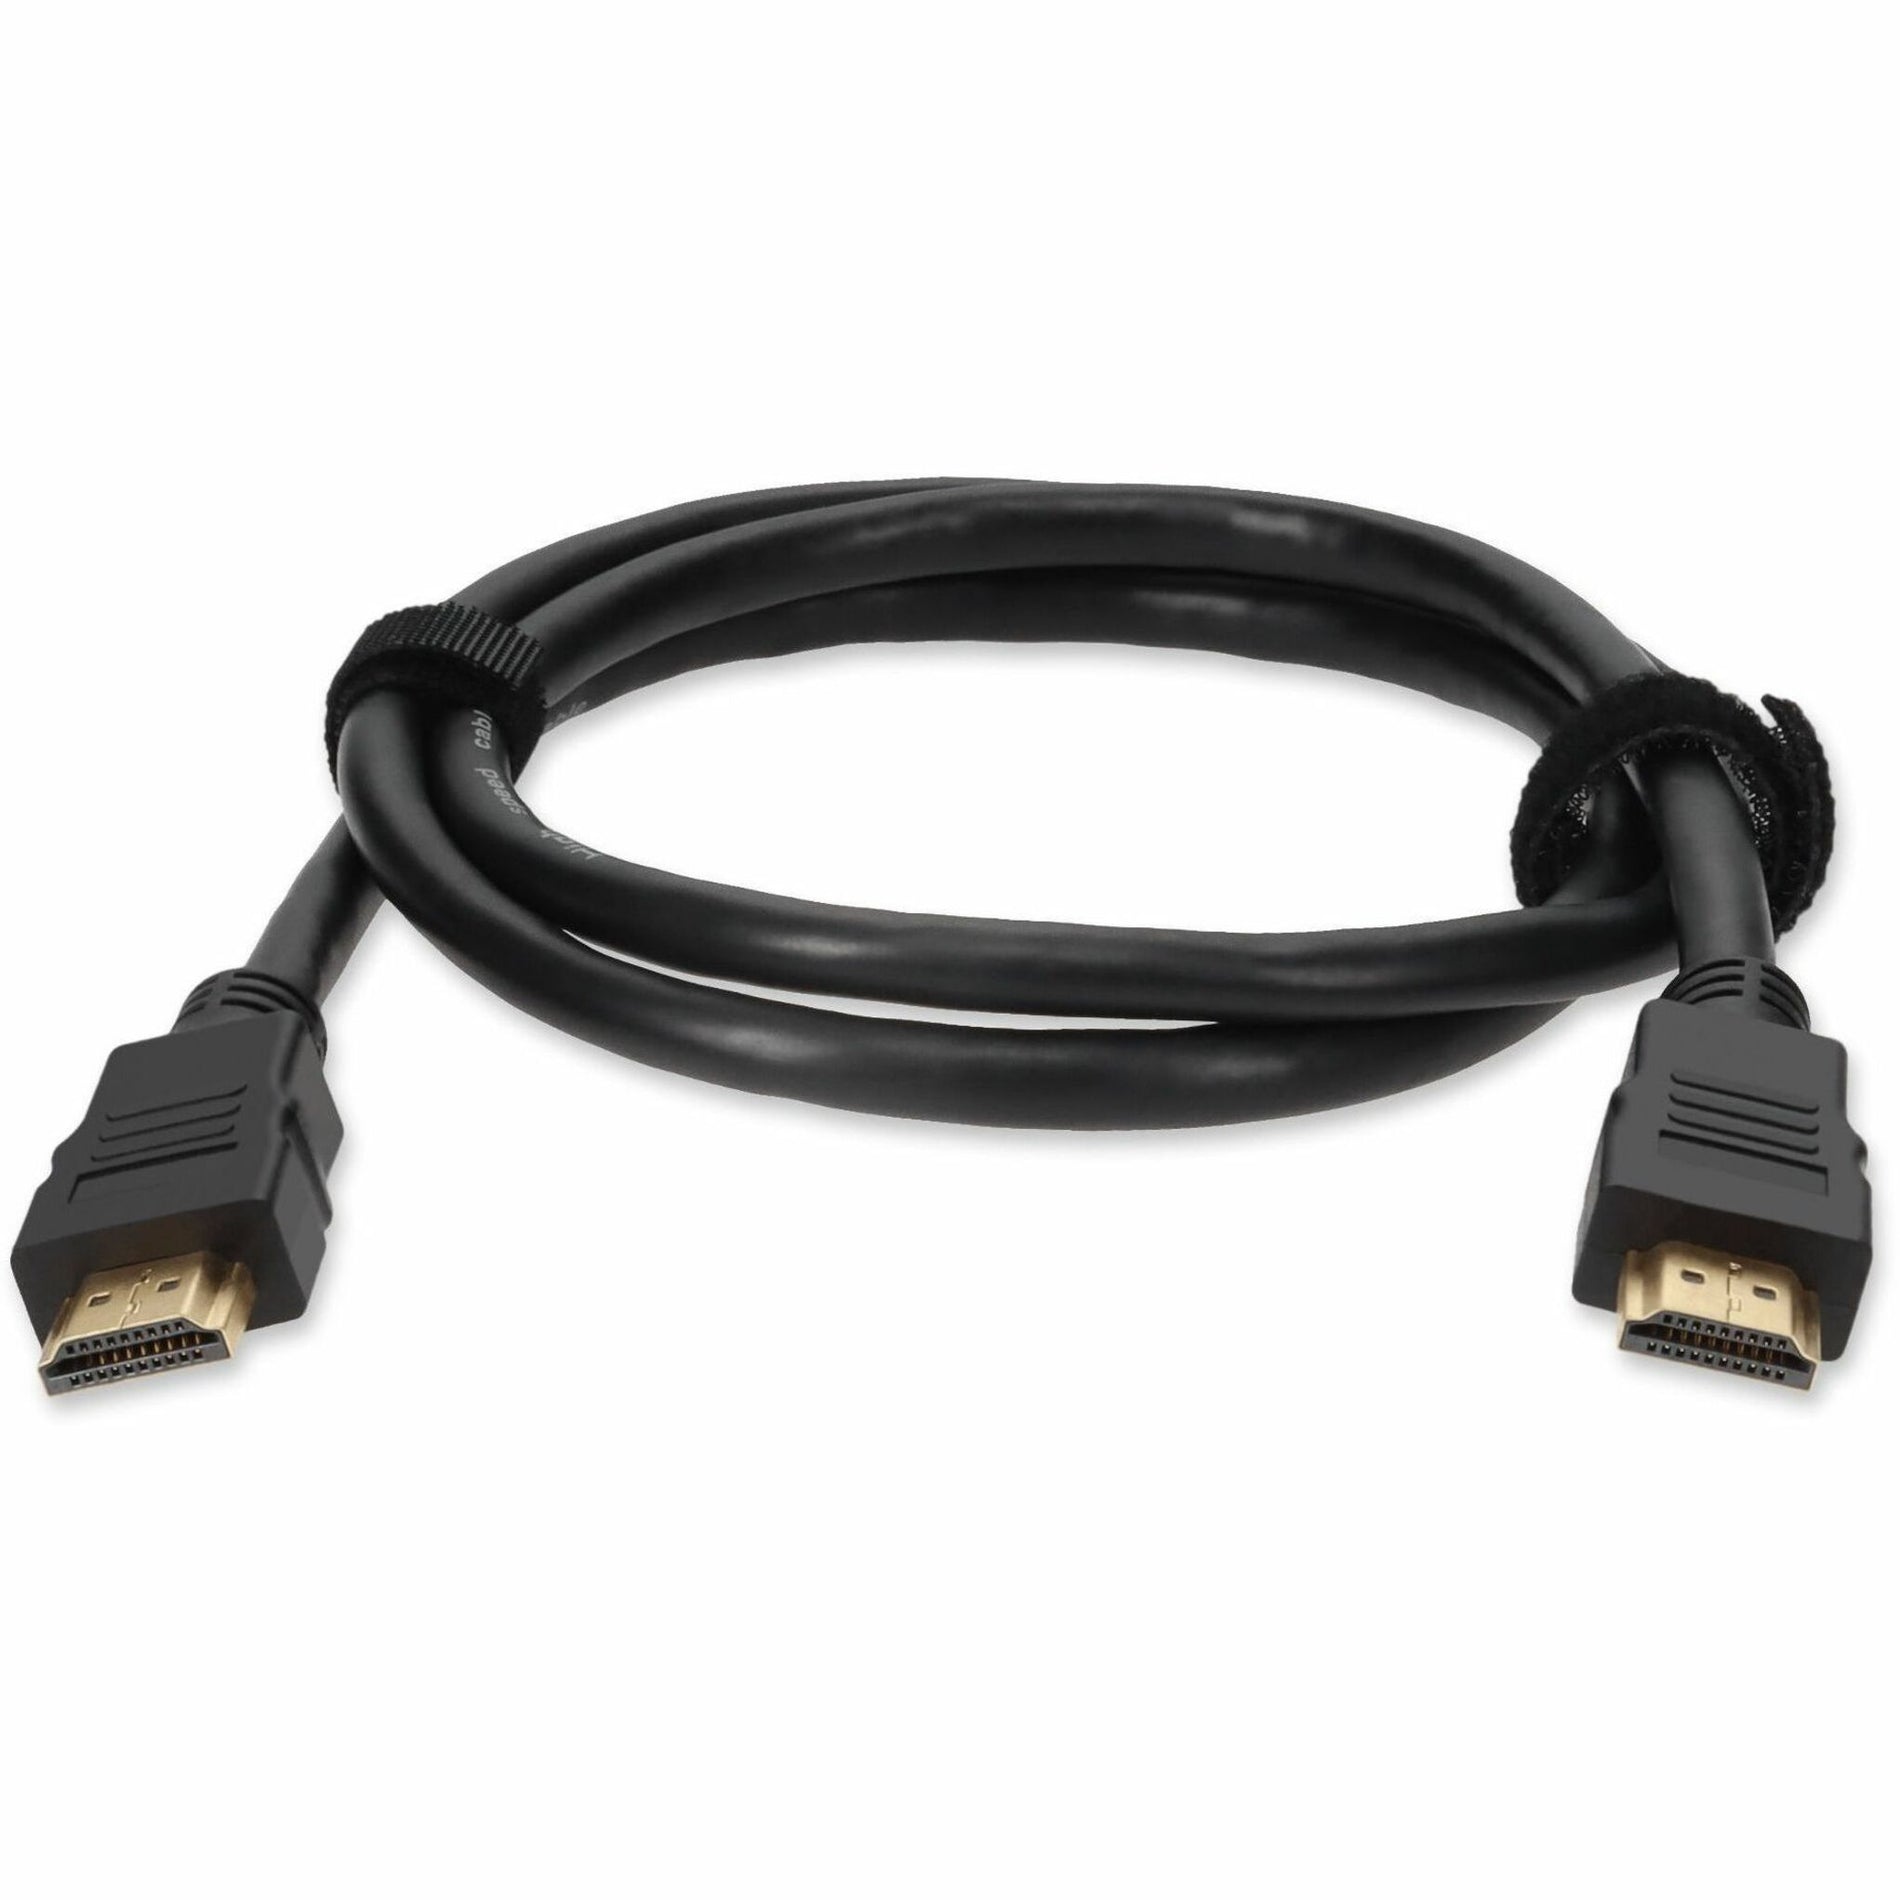 AddOn HDMIHSMM6 6ft HDMI 1.4 High Speed Cable w/Ethernet - Male to Male, 3 Year Warranty, United States